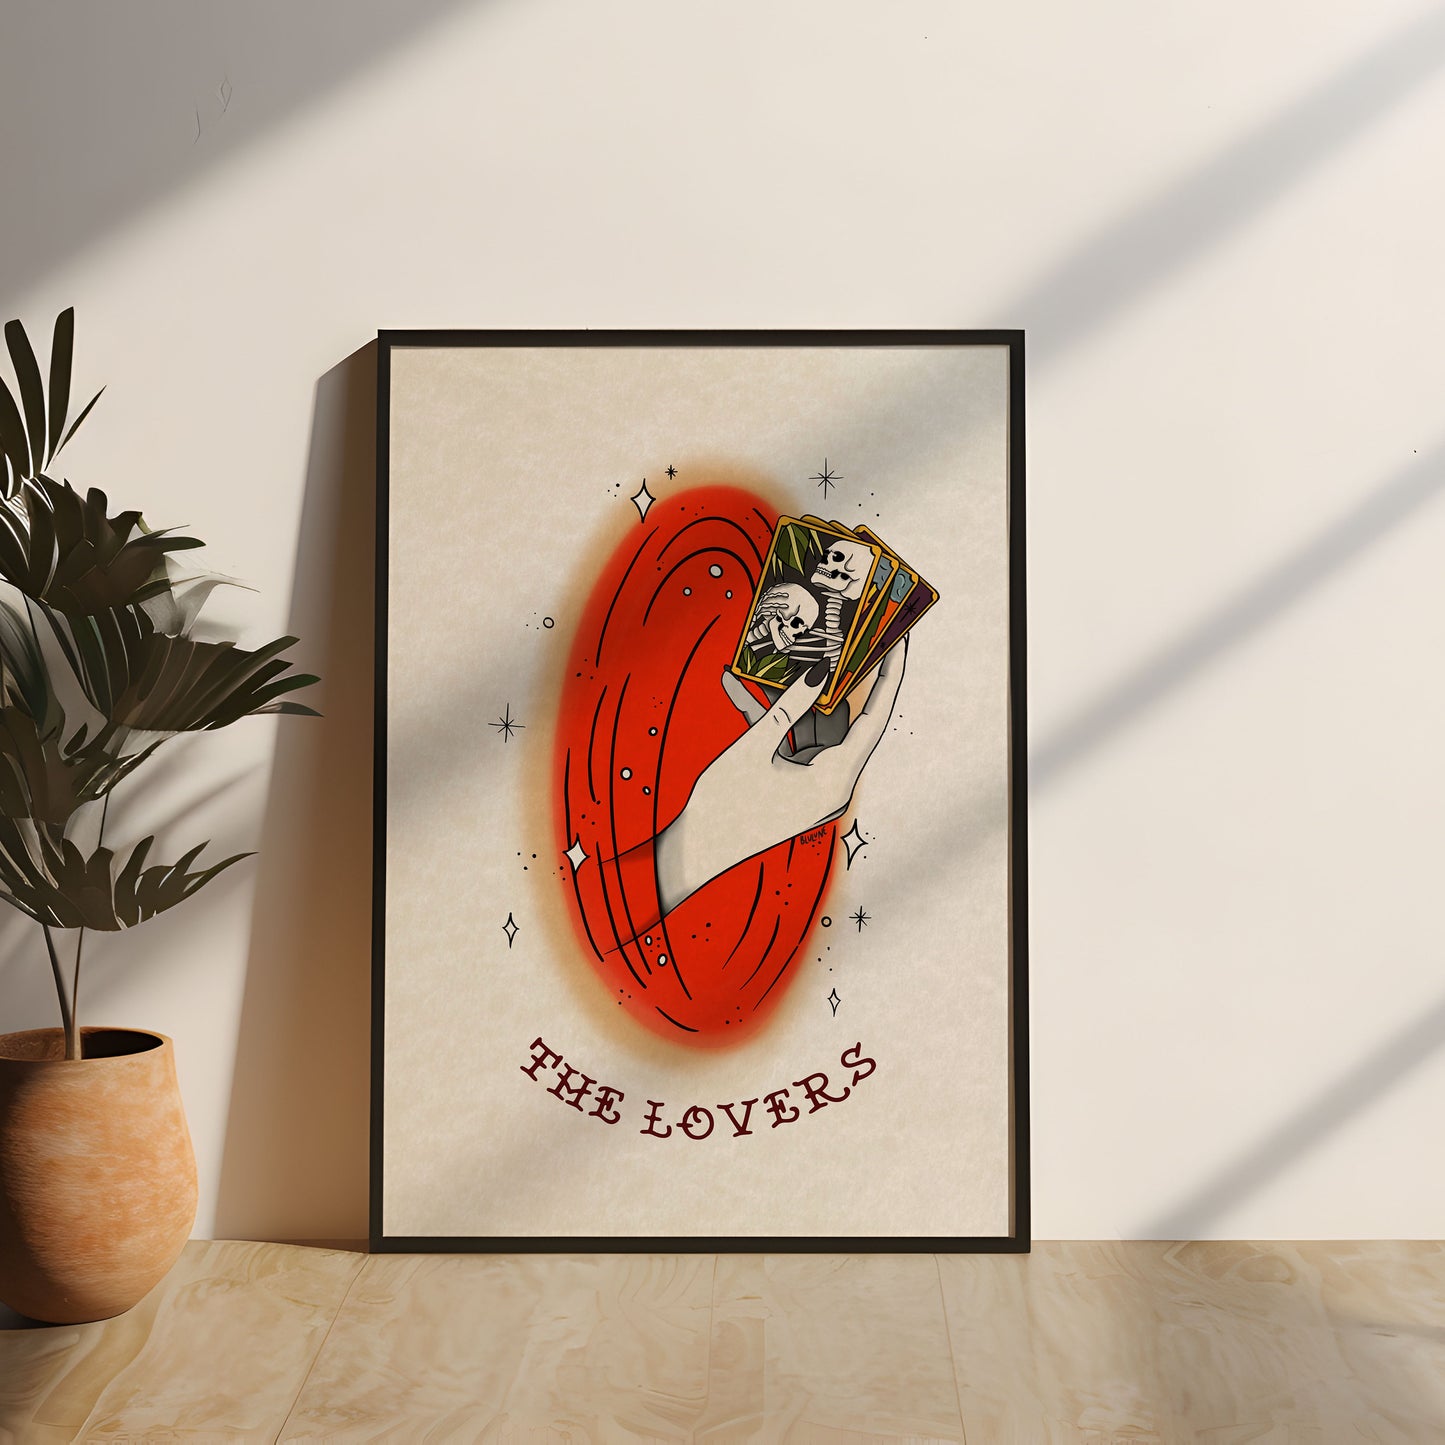 Tattoo Style Poster - The Lovers - Art Print Wall Art - Instant Download - Printable Art